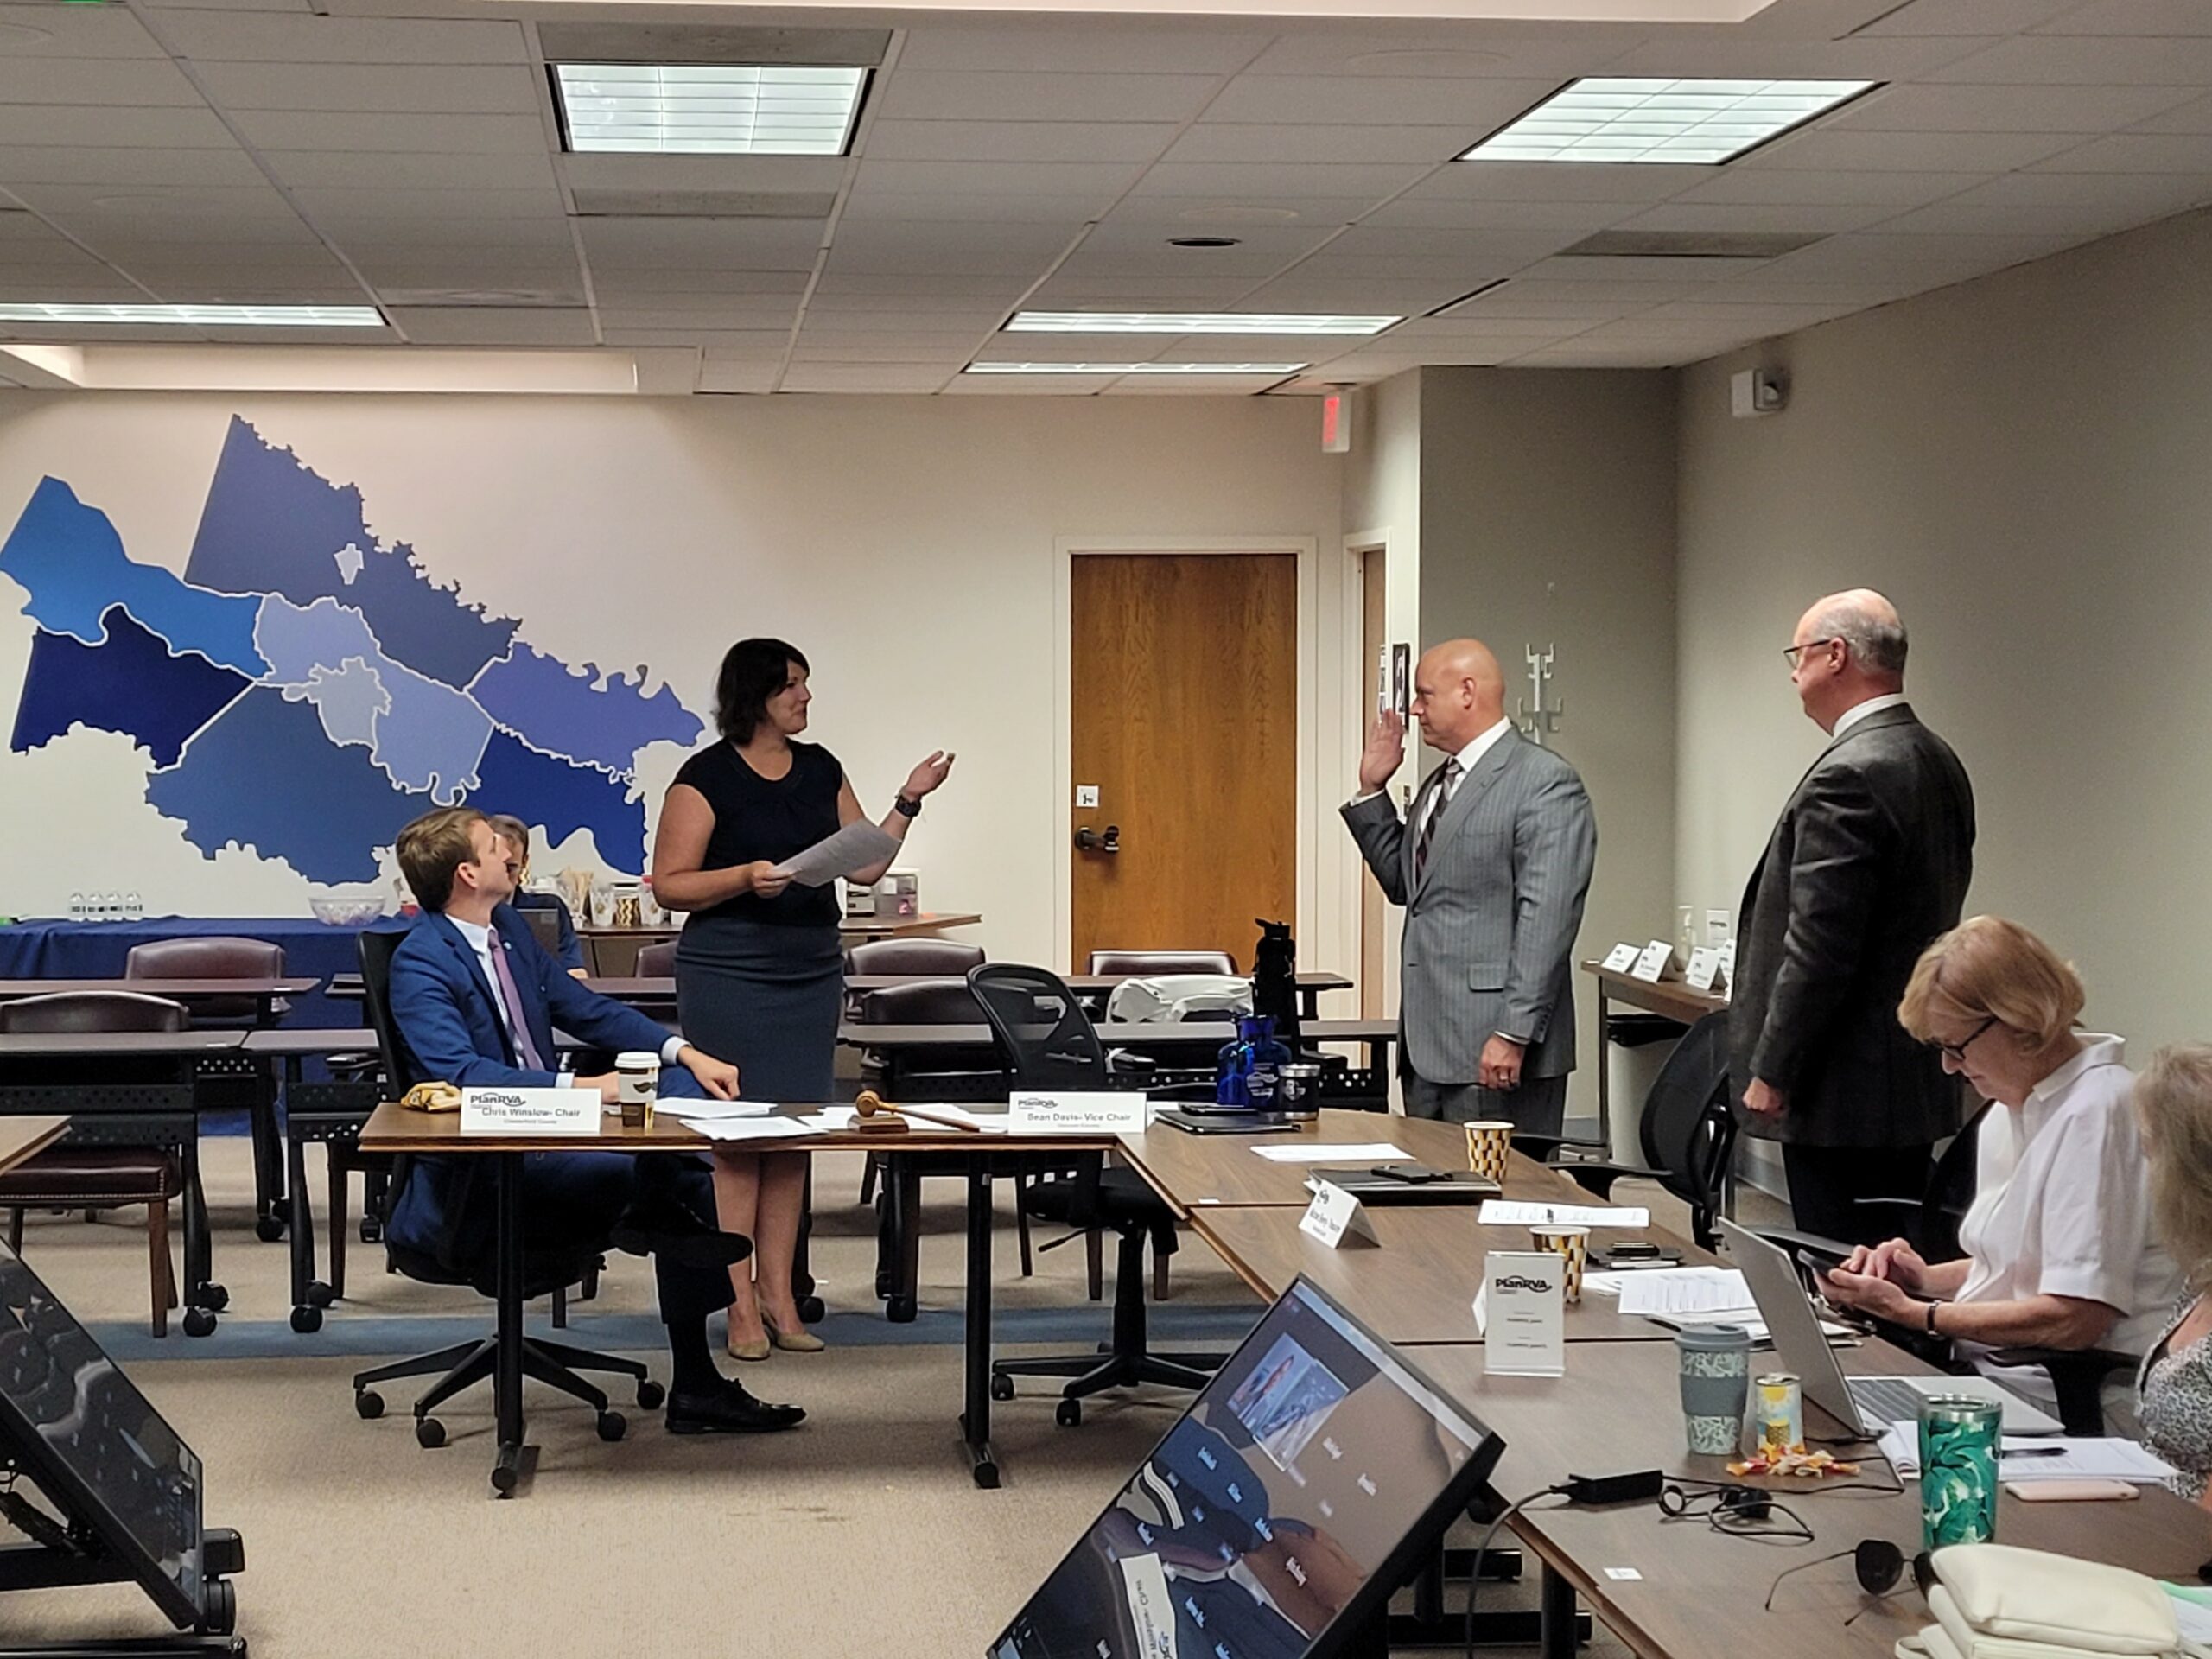 Executive Director, Martha Heeter swears in Sean M. Davis (left) and Michael W. Byerly (right) to serve as PlanRVA Chair and Vice Chair for Fiscal Year 2023.